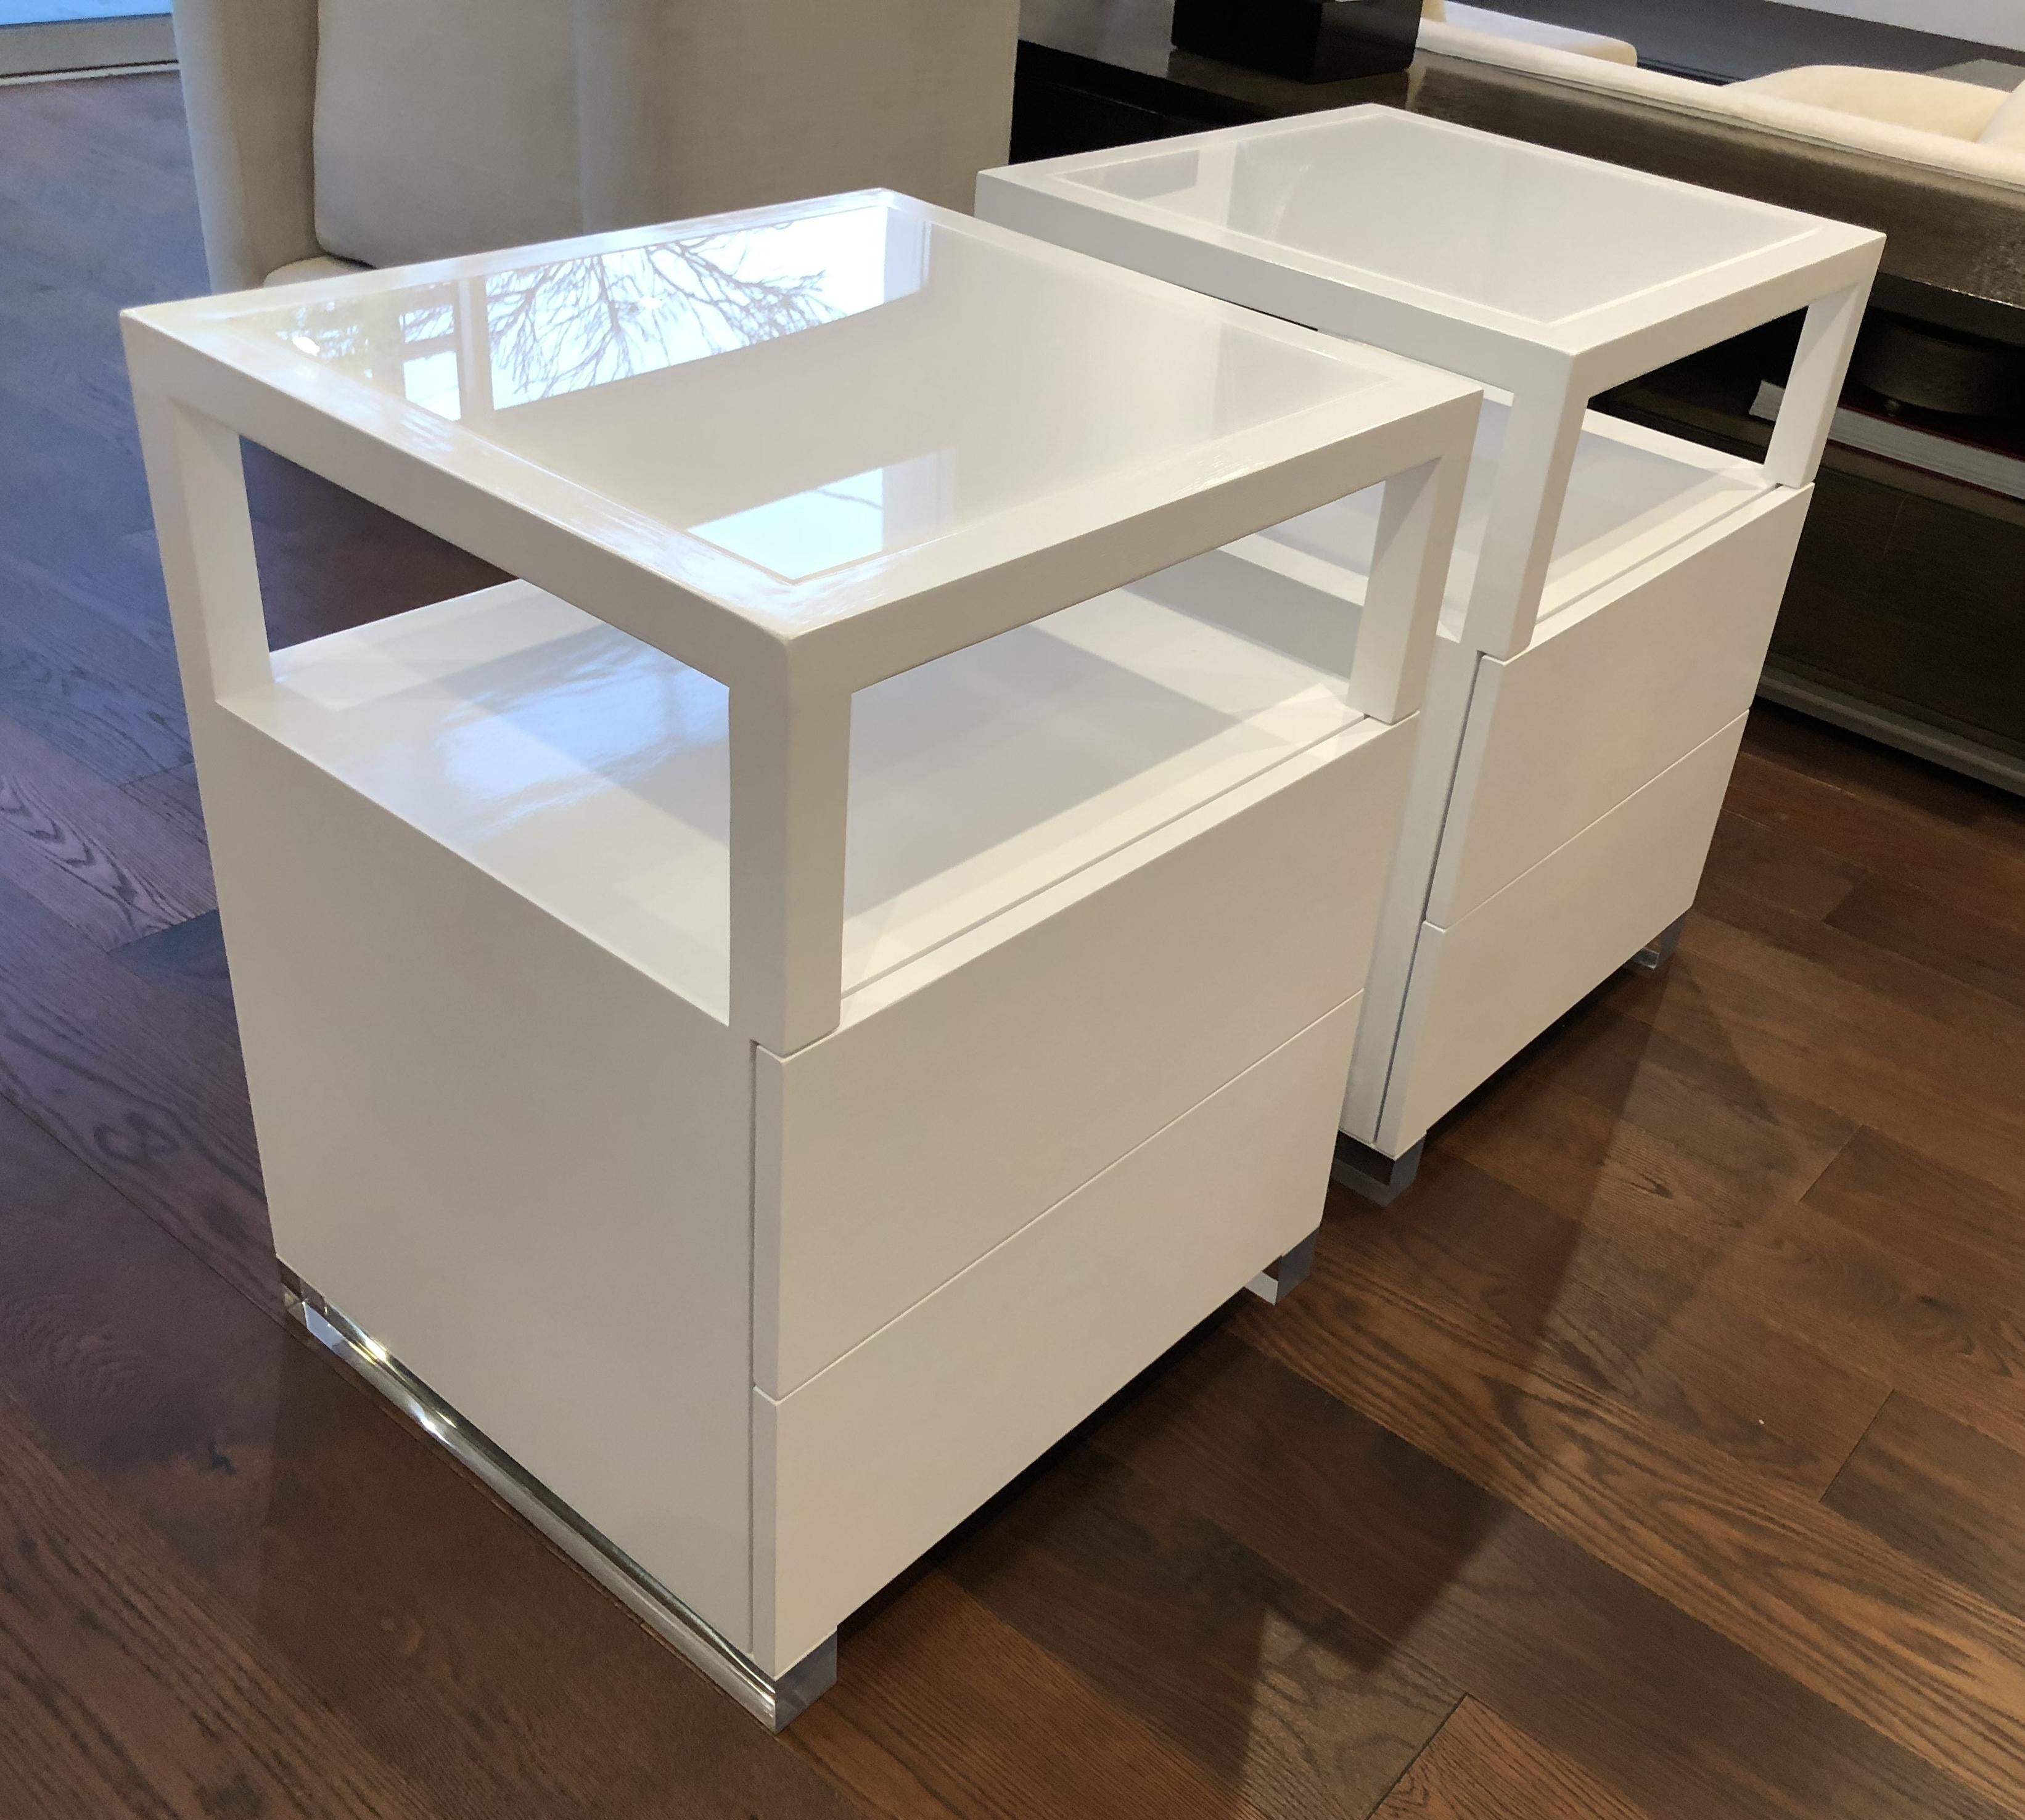 American Pair of Custom White Lacquer and Lucite Nightstands by Cain Modern For Sale